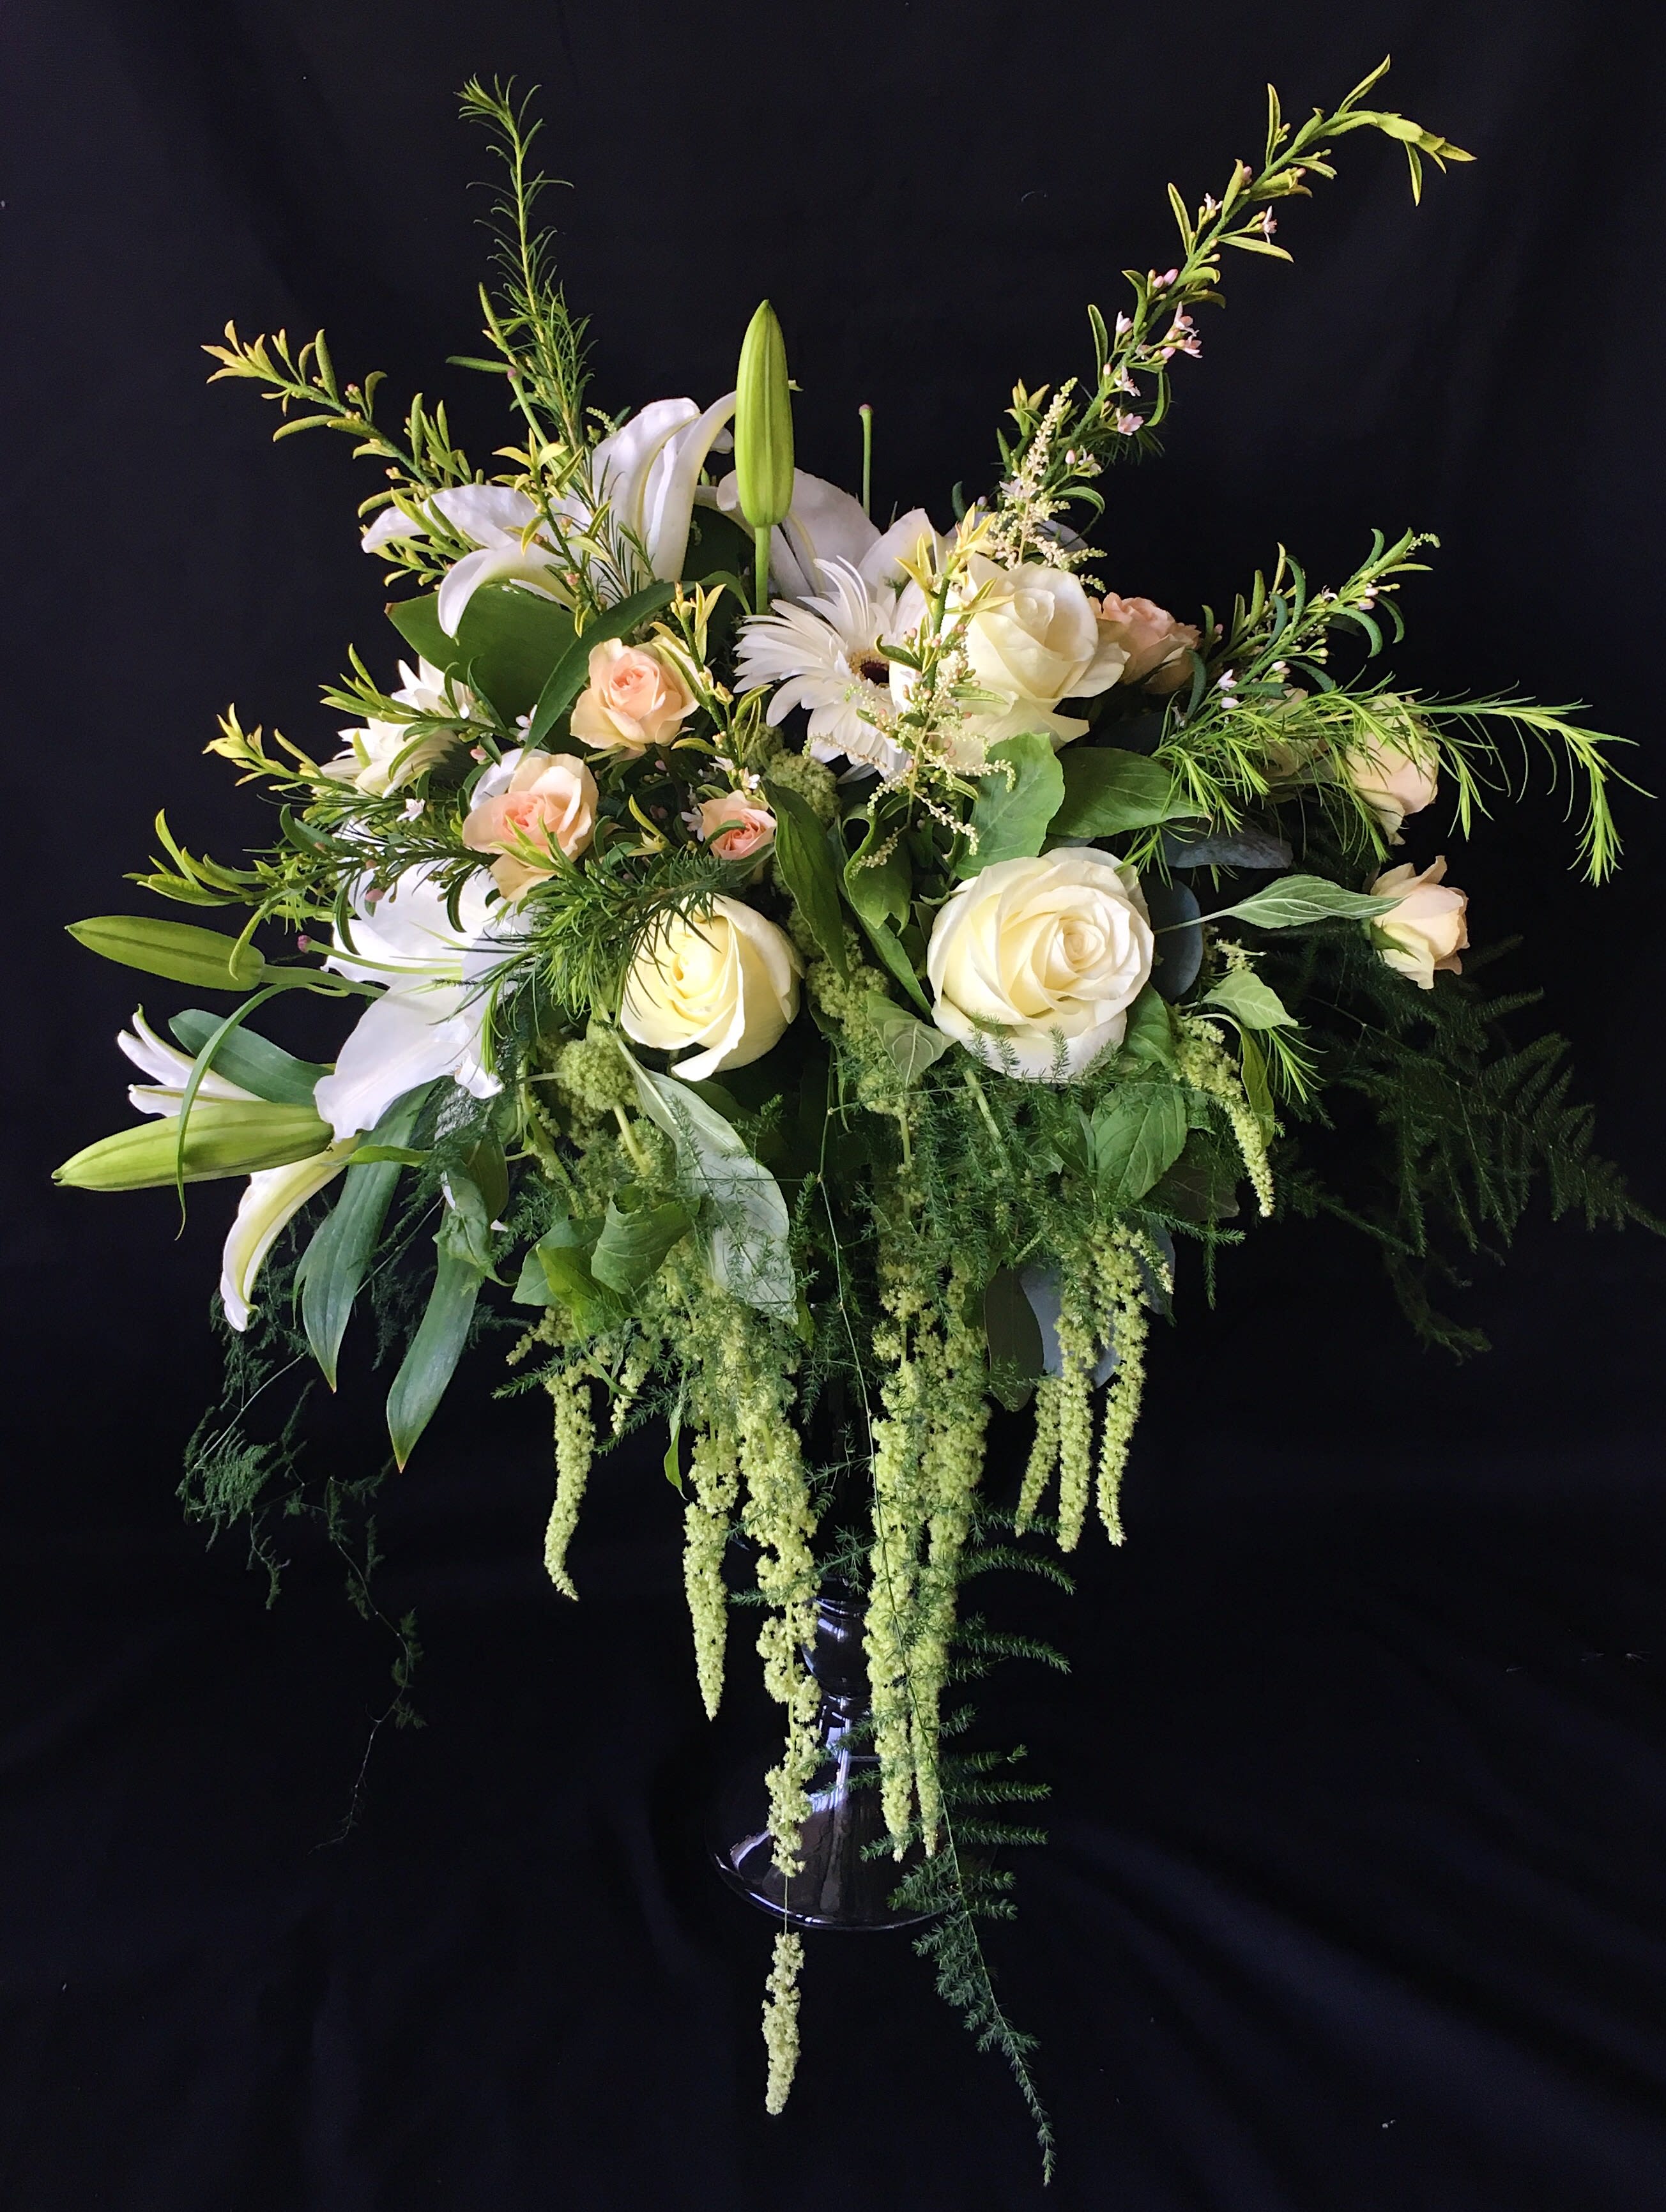 Simple Beauty - Features a variety of flowers such as; white gerberas, white lilies, and green hanging ameranthus to give that simple yet elegant look.    *Flowers subject to change based on supply*